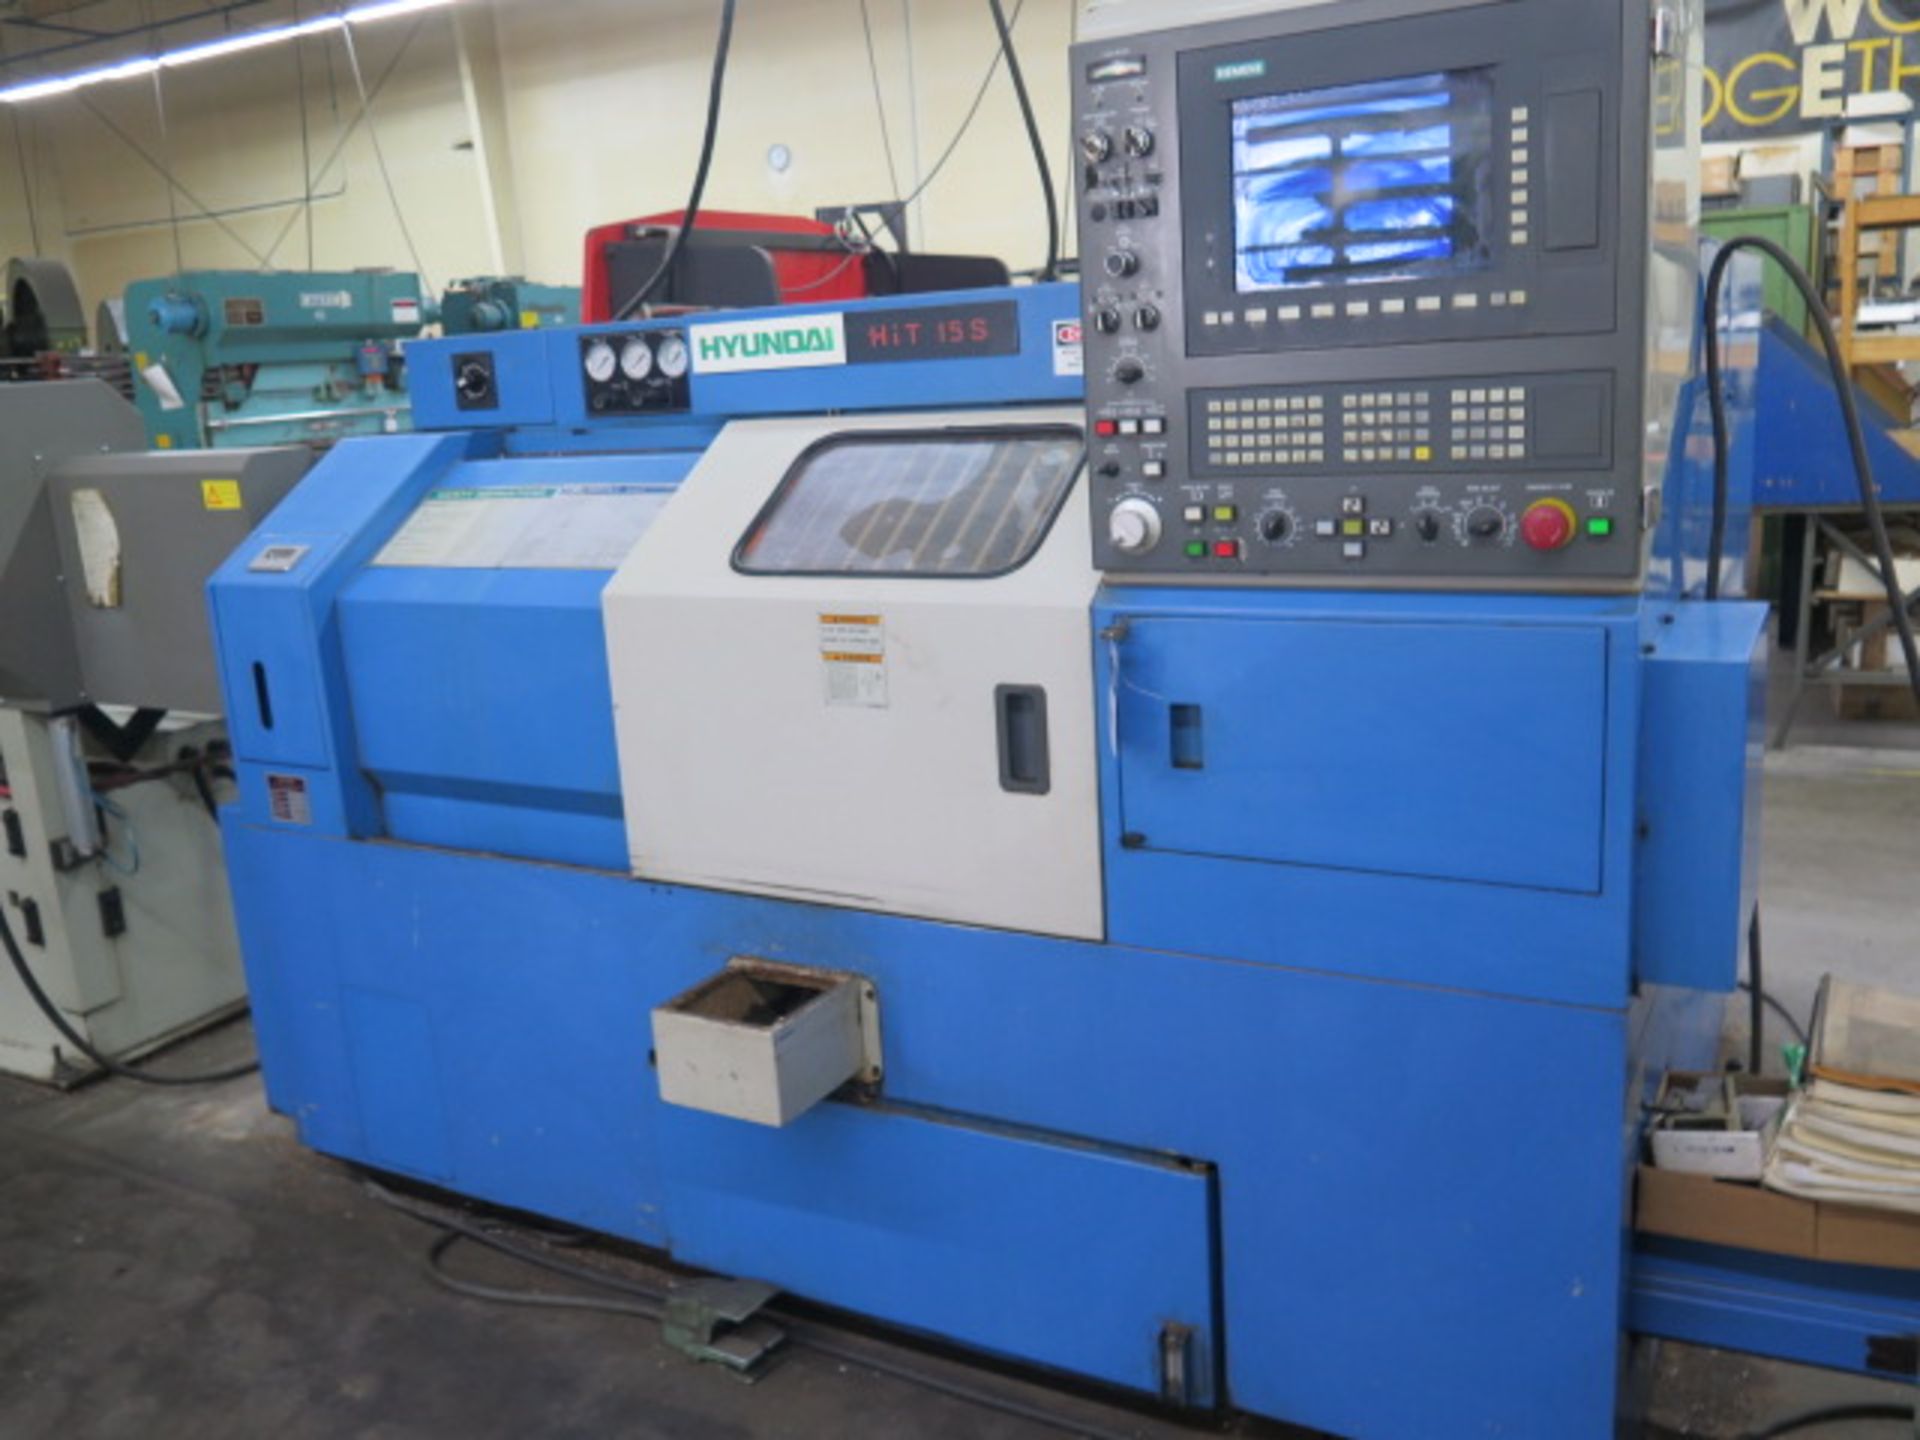 Hyundai HiT 15S CNC Turning Center s/n 5-009 w/ Siemens Controls, Tool Presetter, SOLD AS IS - Image 2 of 16